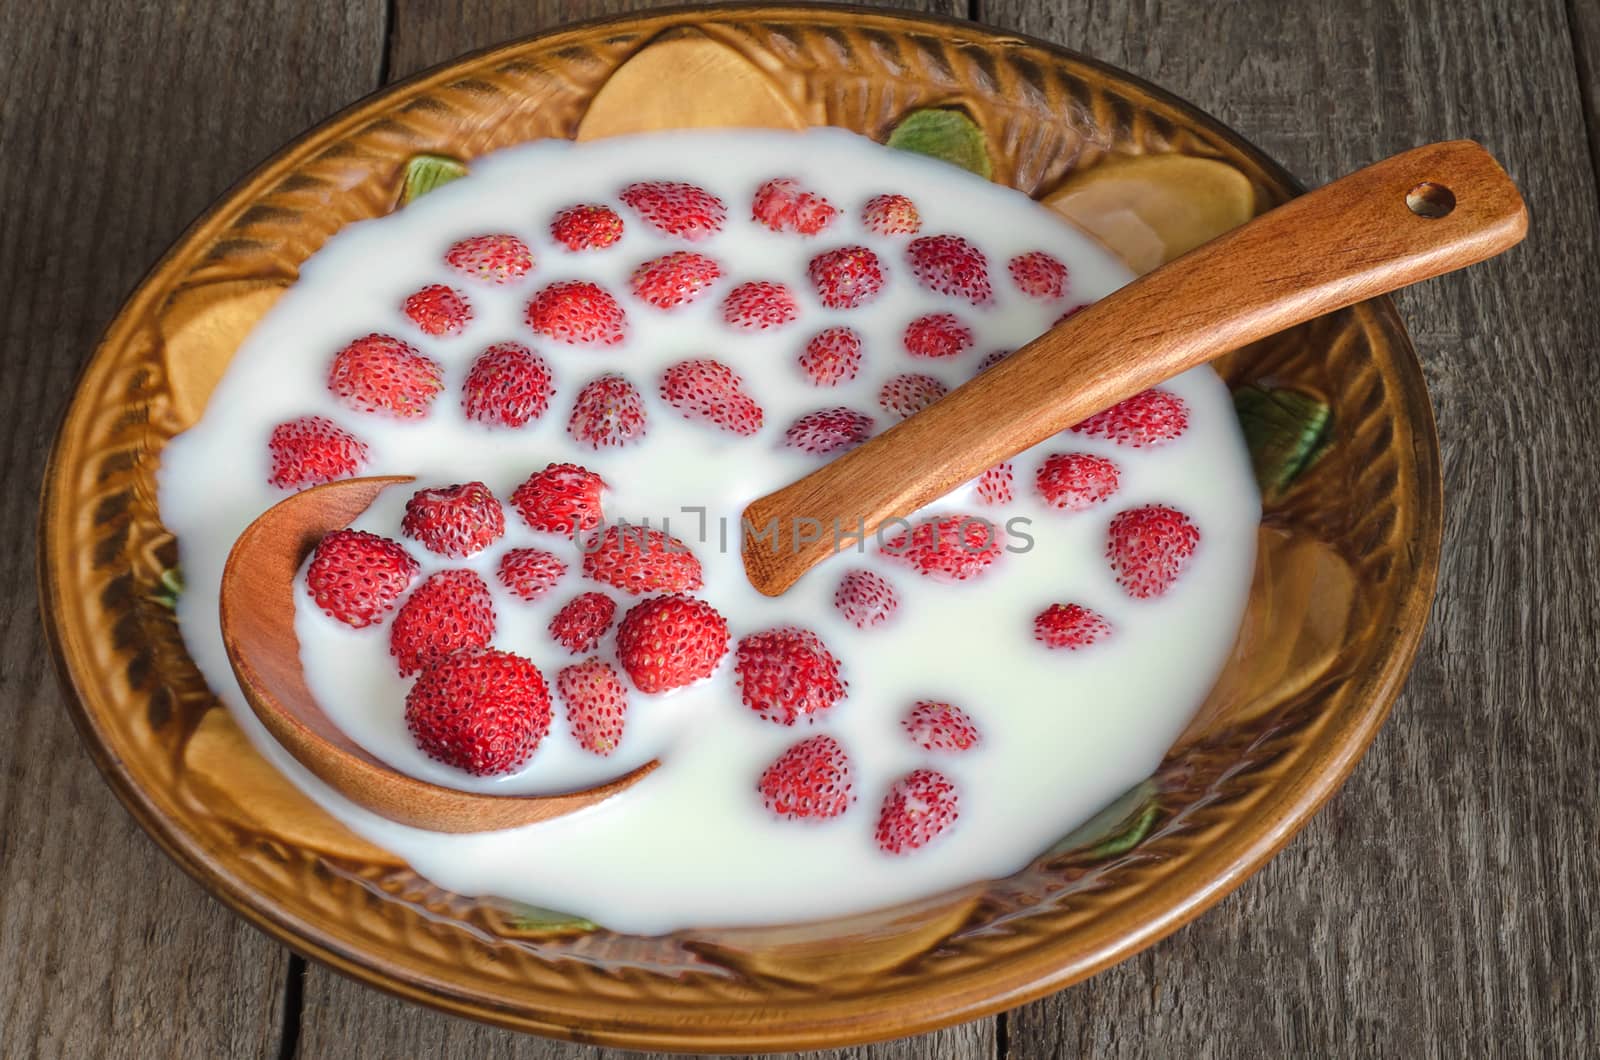 Strawberry with milk in a ceramic bowl and spoon on old wooden background